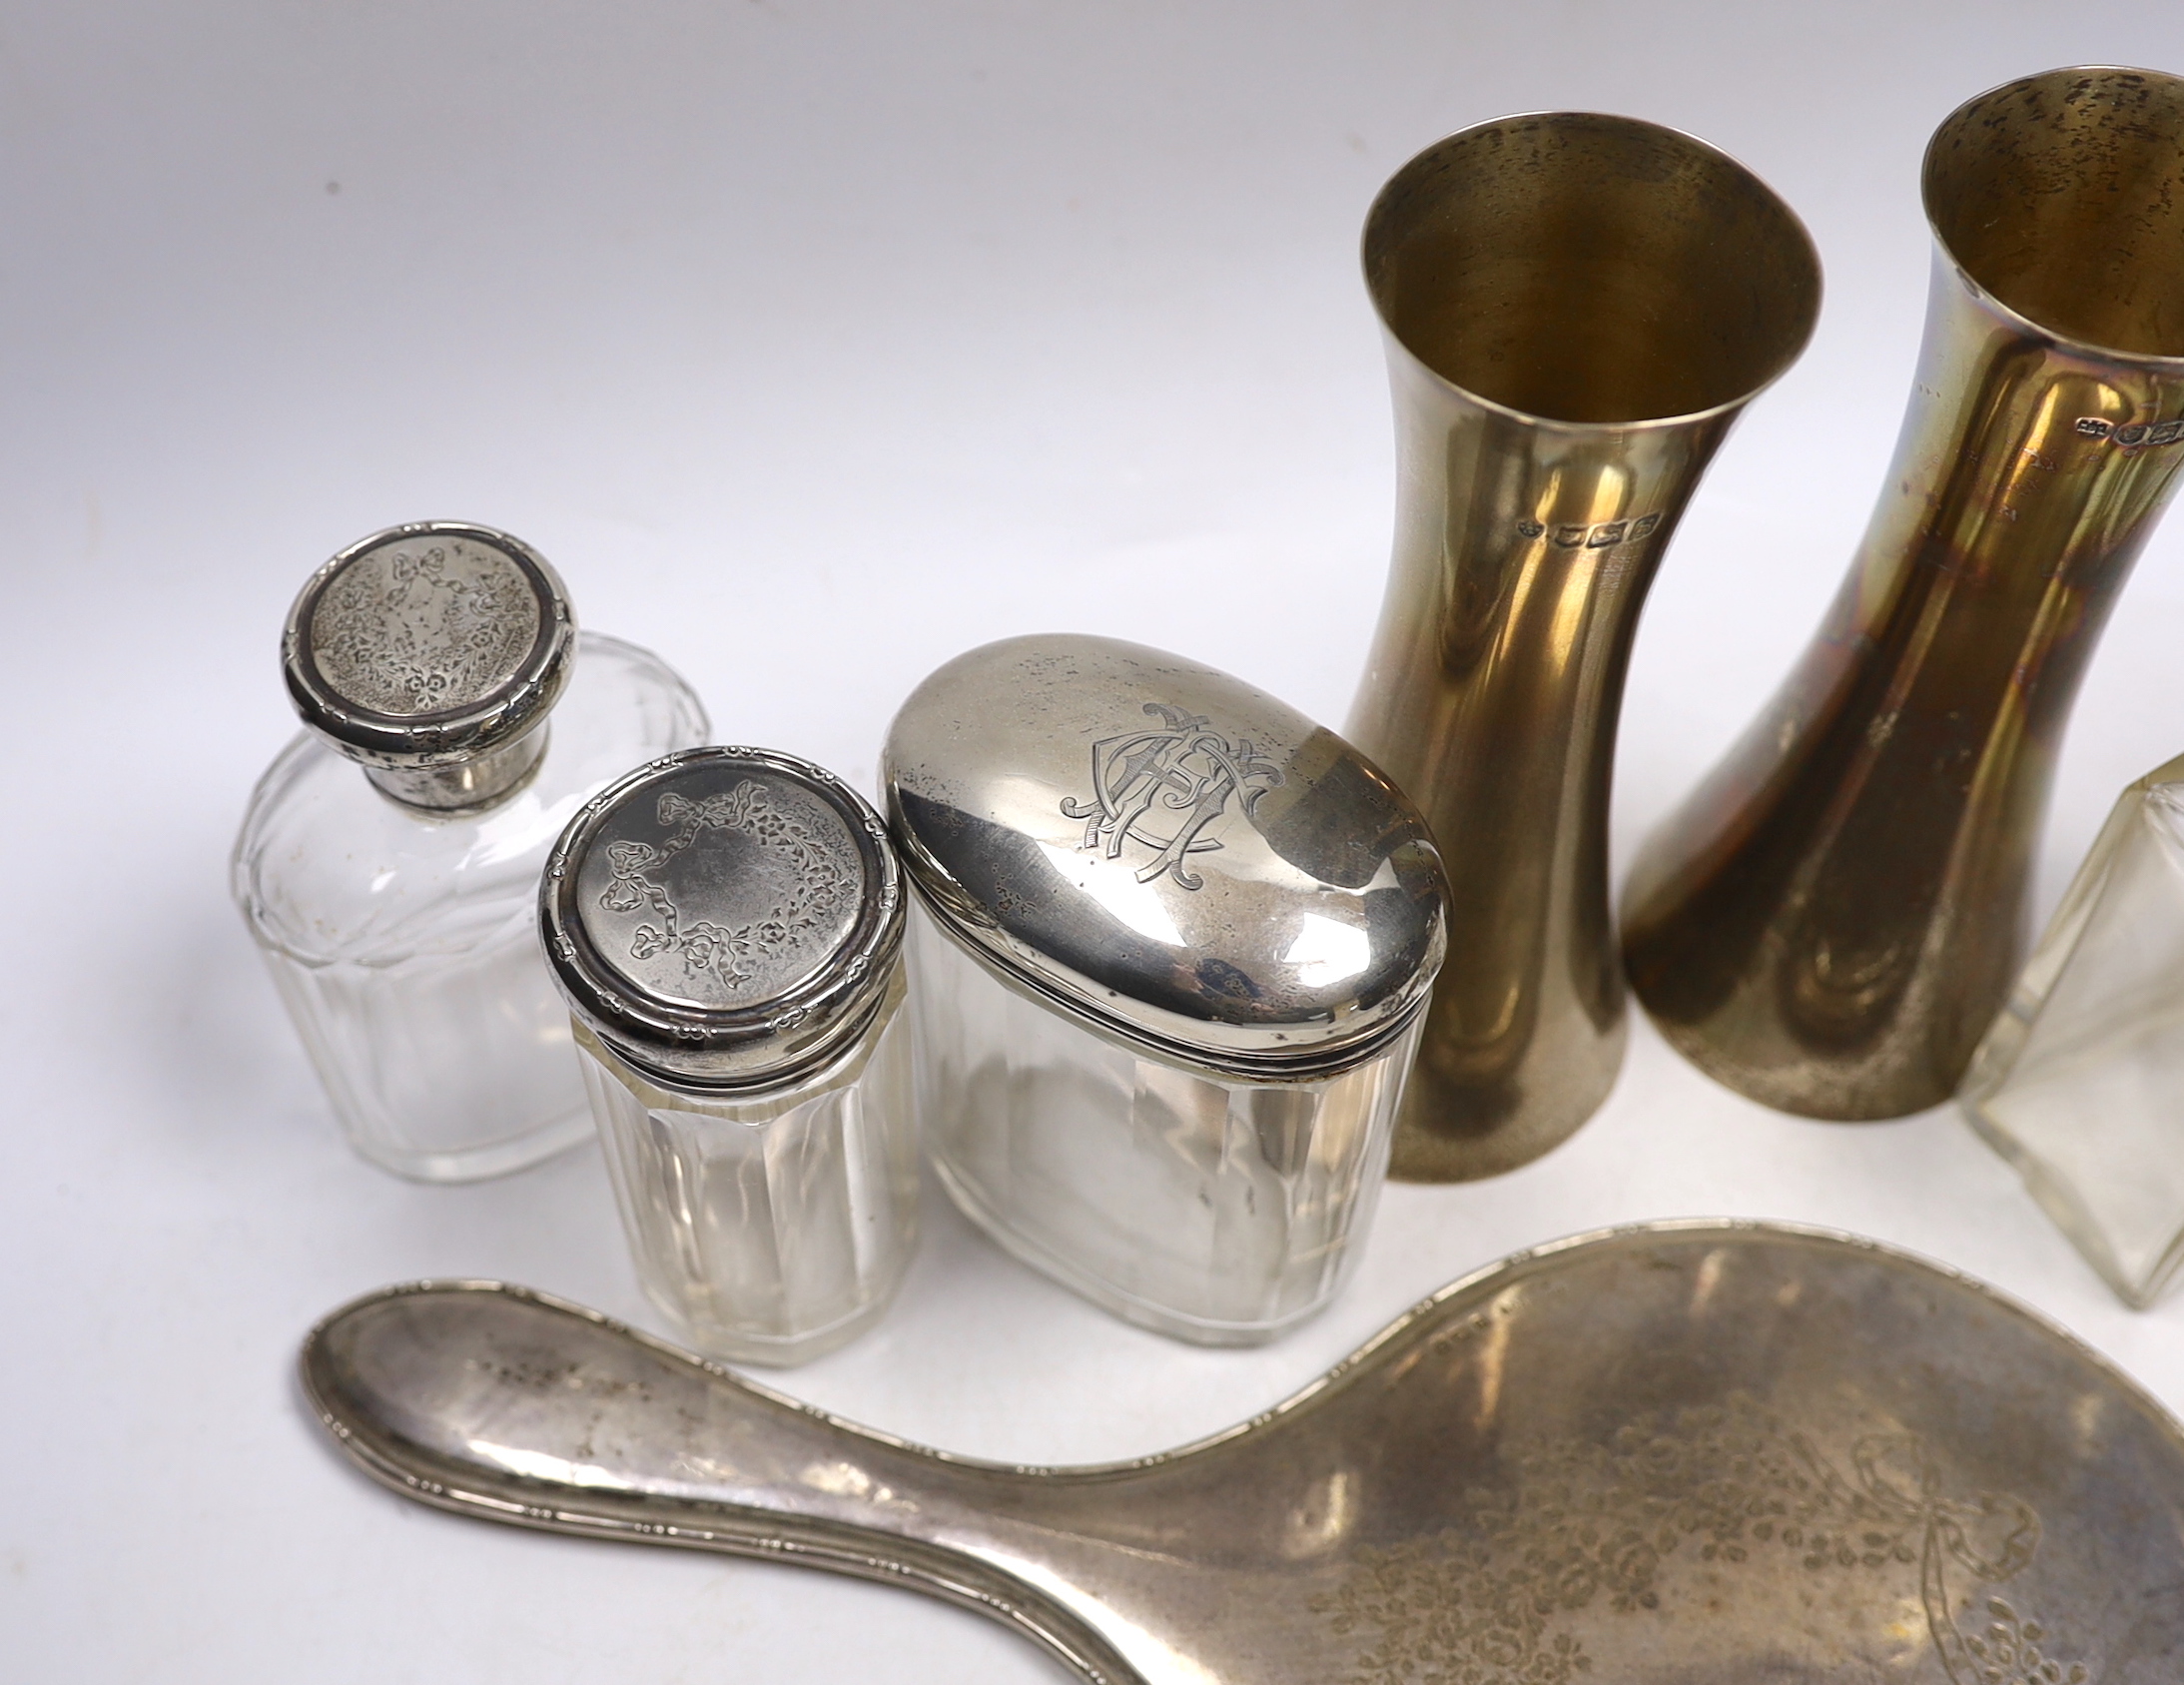 A pair of Edwardian silver waisted spill vase, London, 1907, 15cm, six silver mounted glass toilet jars, a silver mounted hand mirror and comb.